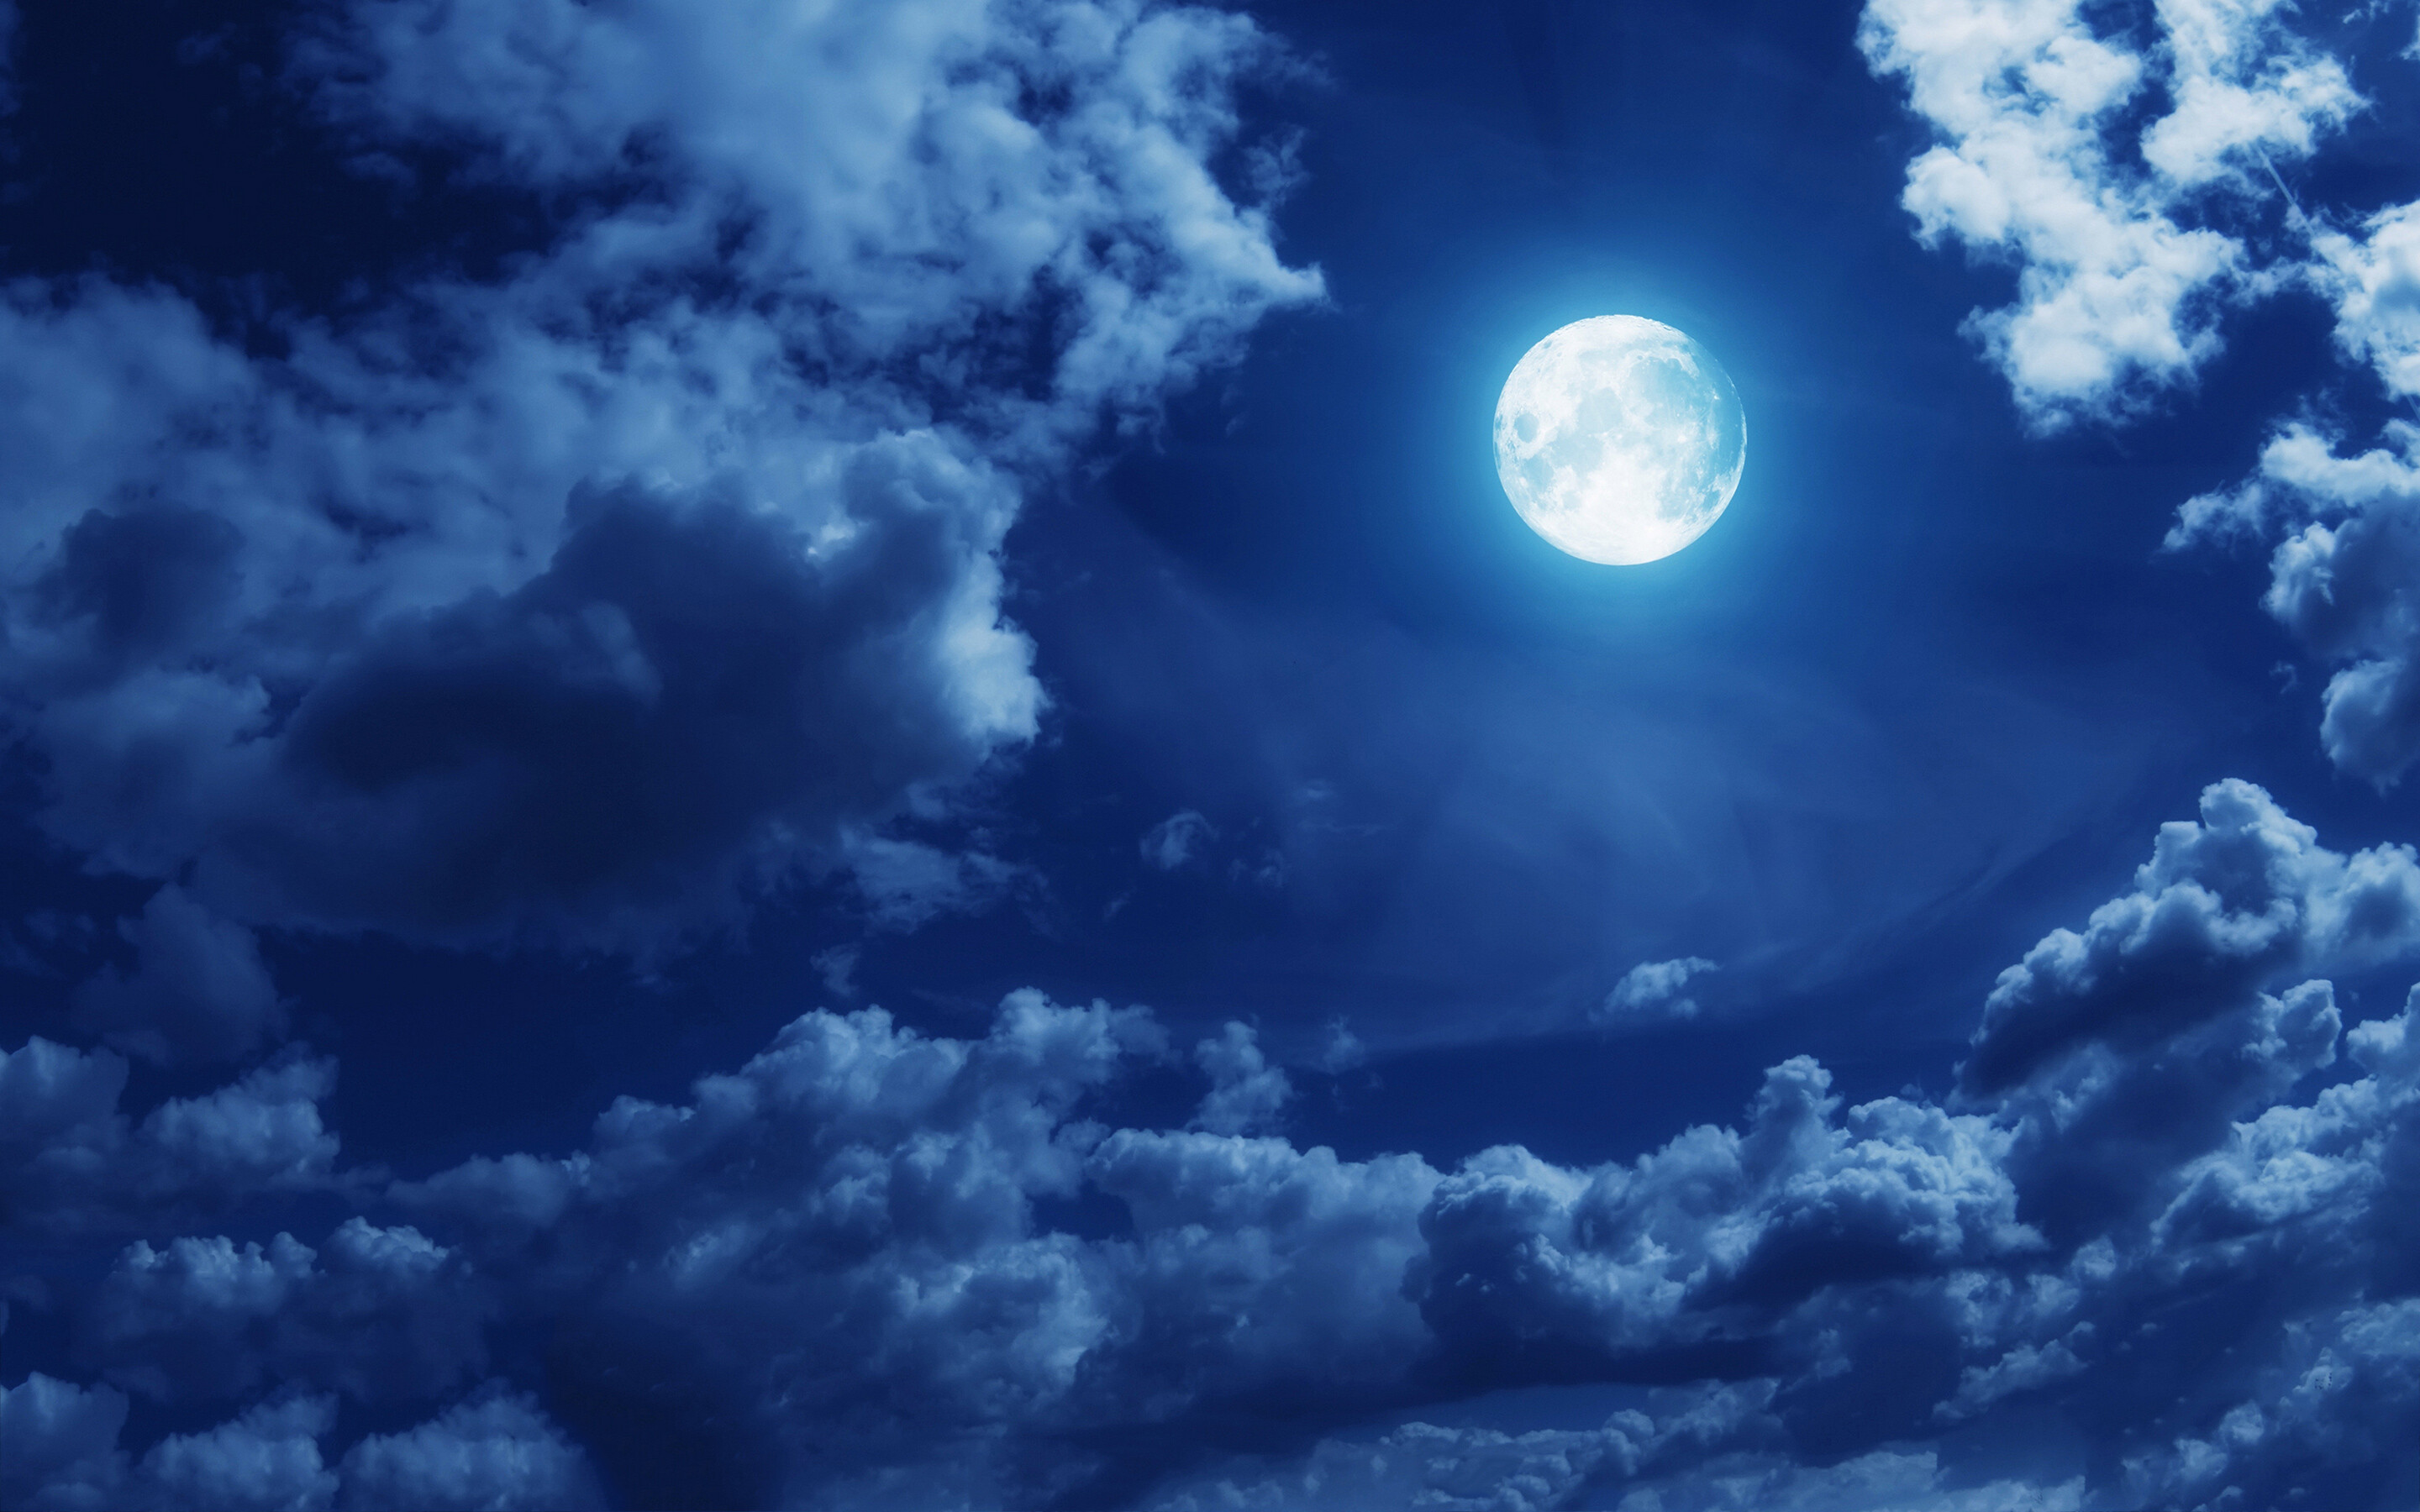 Moonlight: The Moon, Earth's only natural satellite, Night, Clouds. 2880x1800 HD Wallpaper.